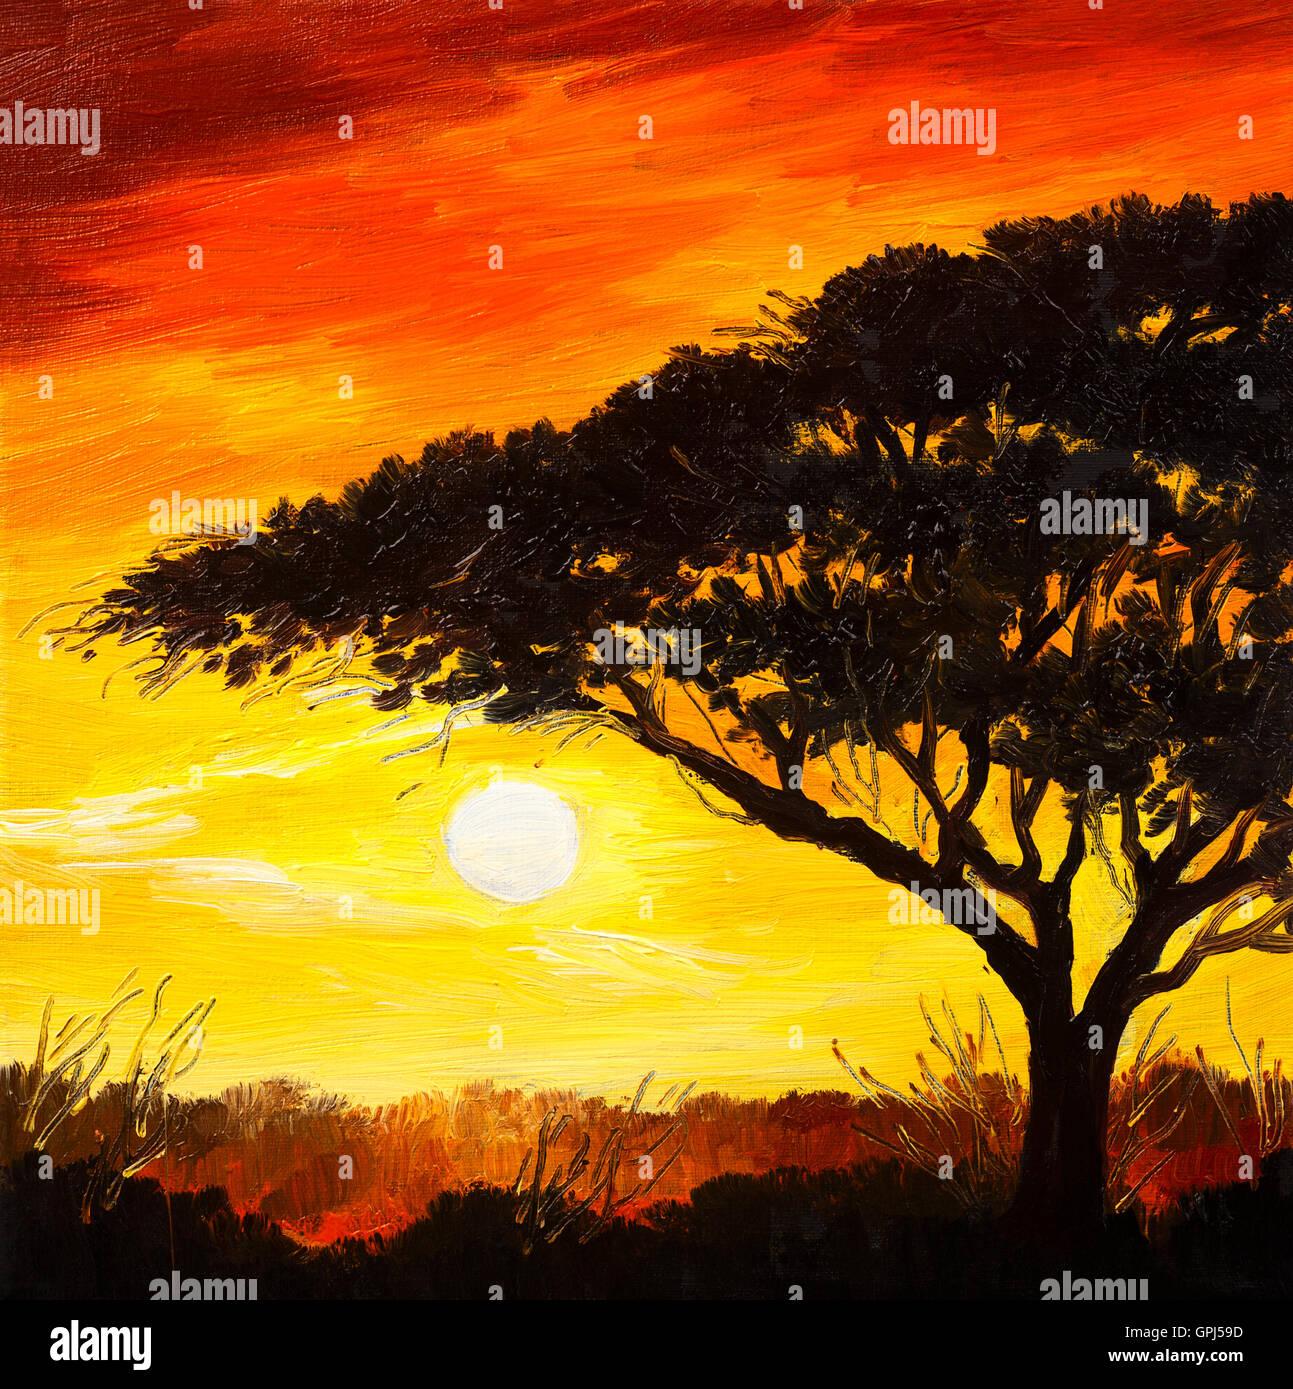 Oil Painting Landscape Sunset In The Forest Wallpaper Bright